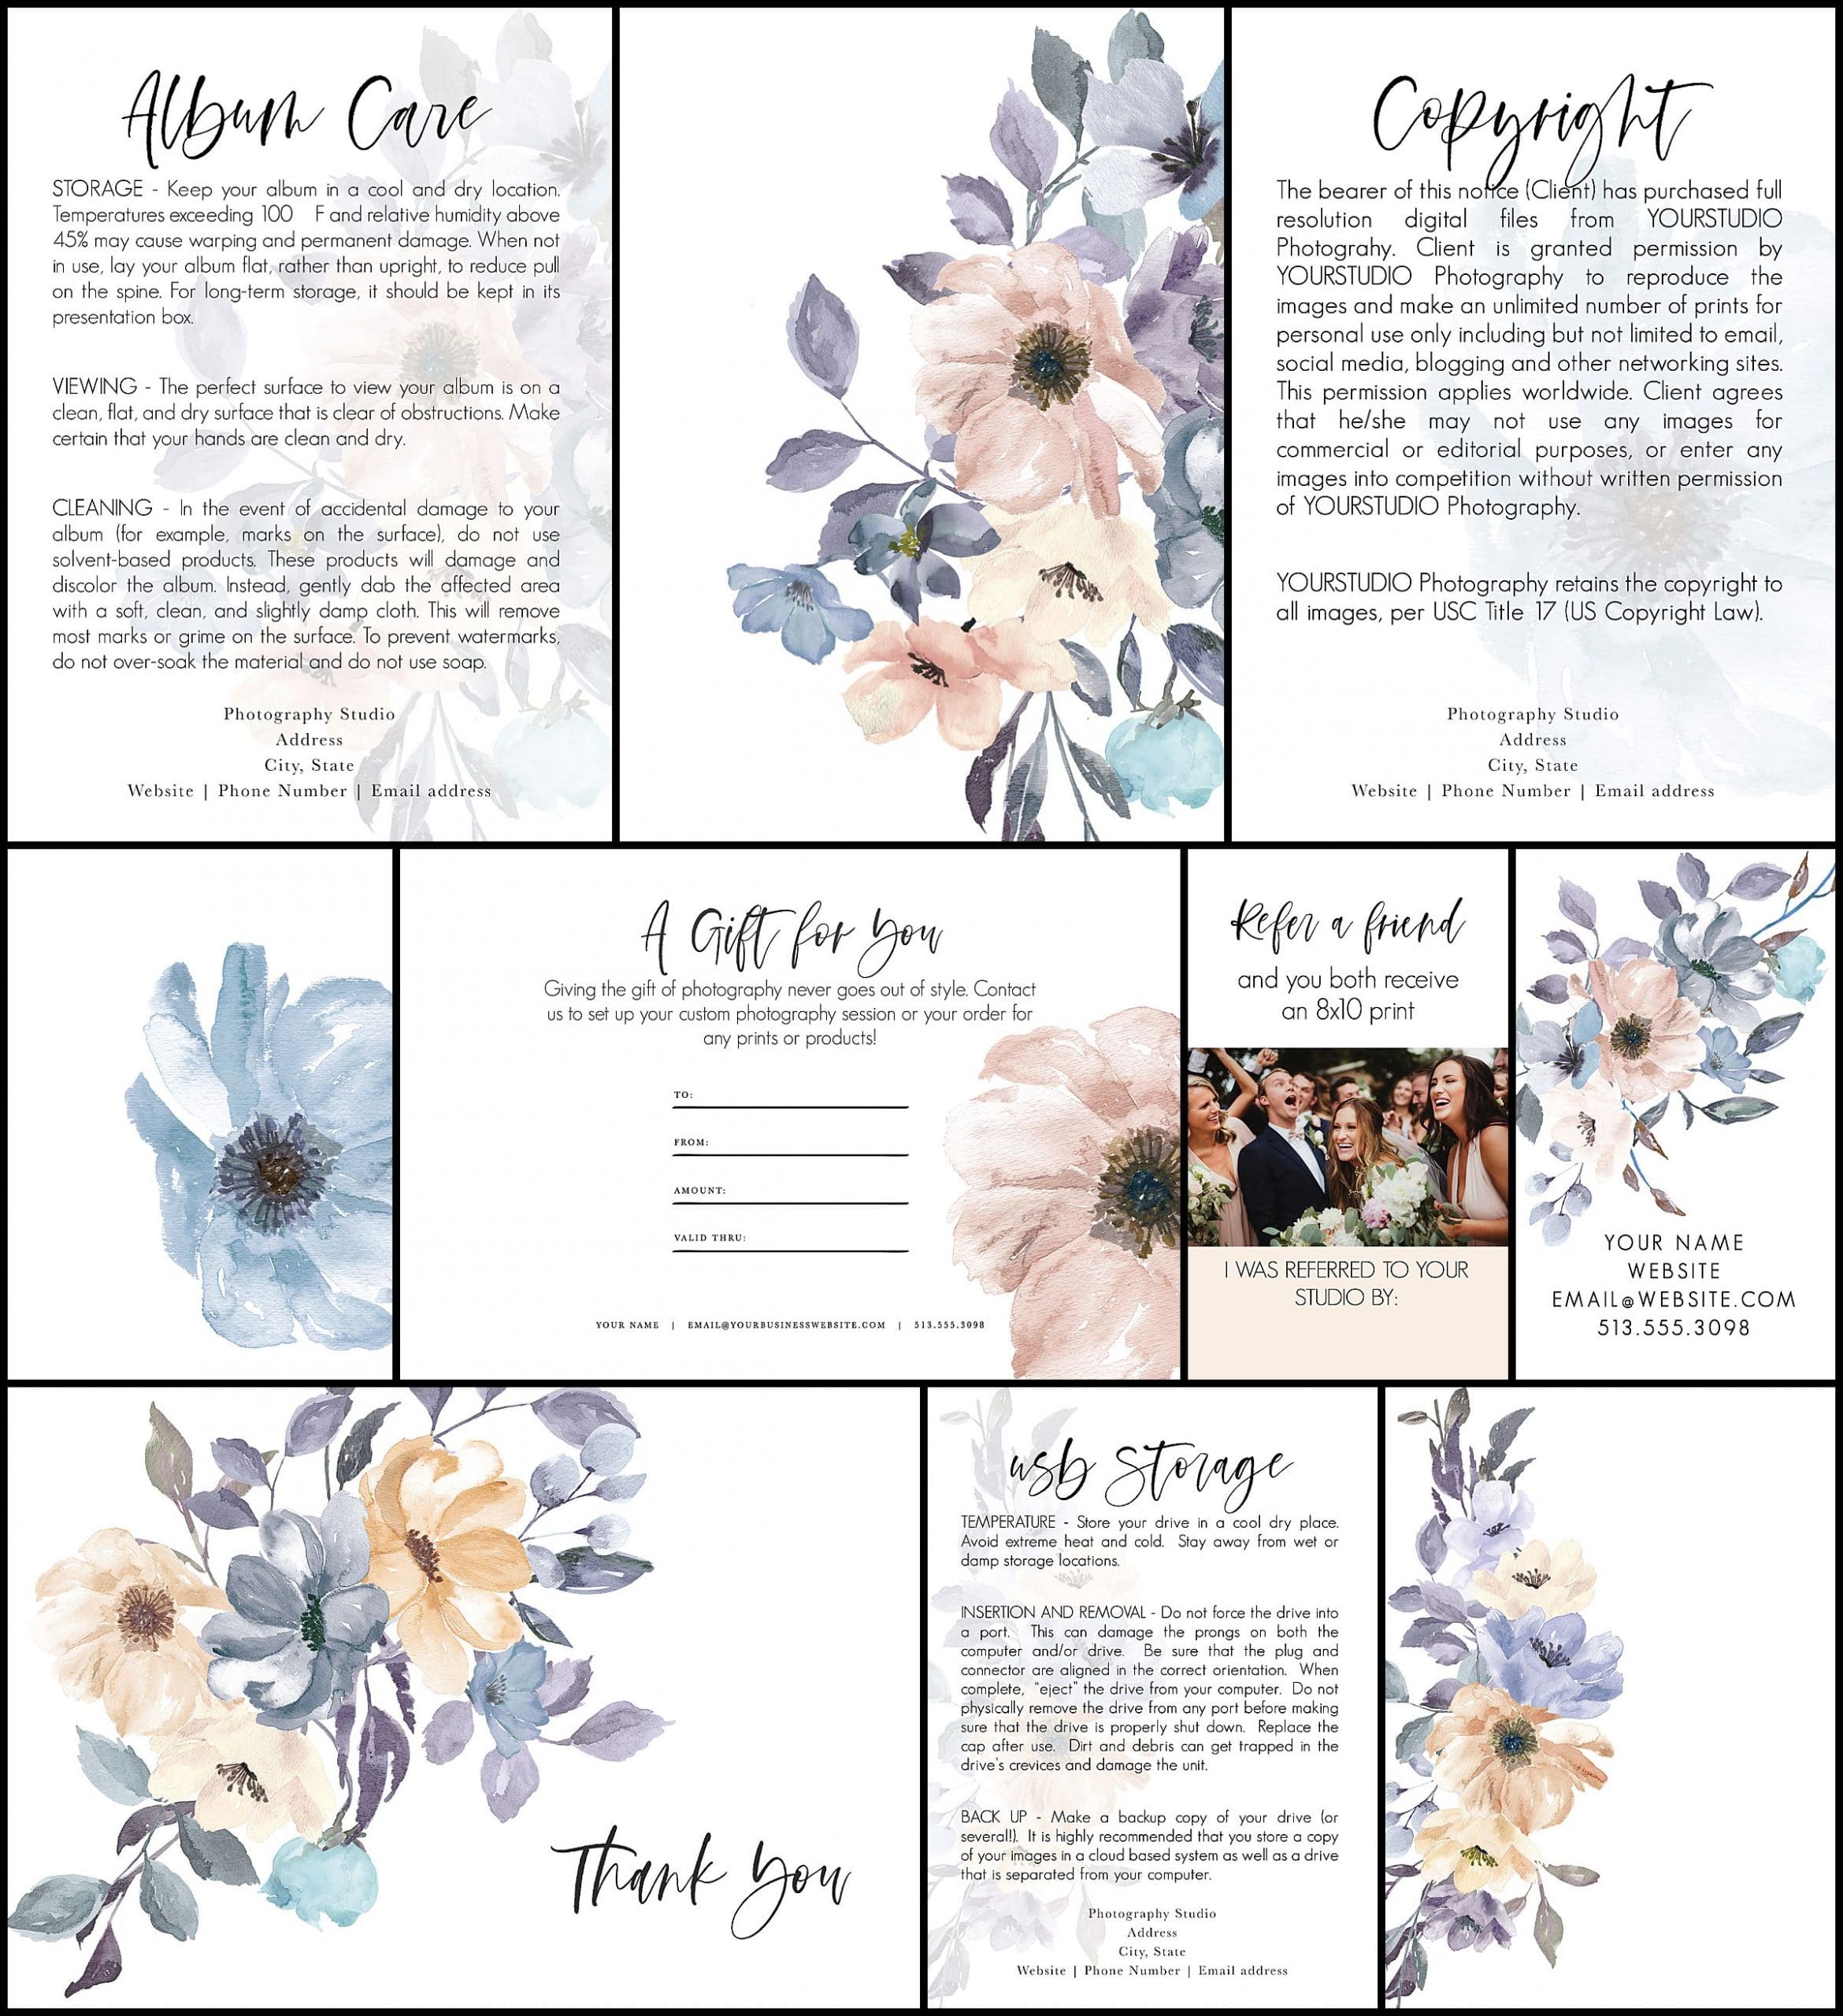 clean up drive clipart of flowers